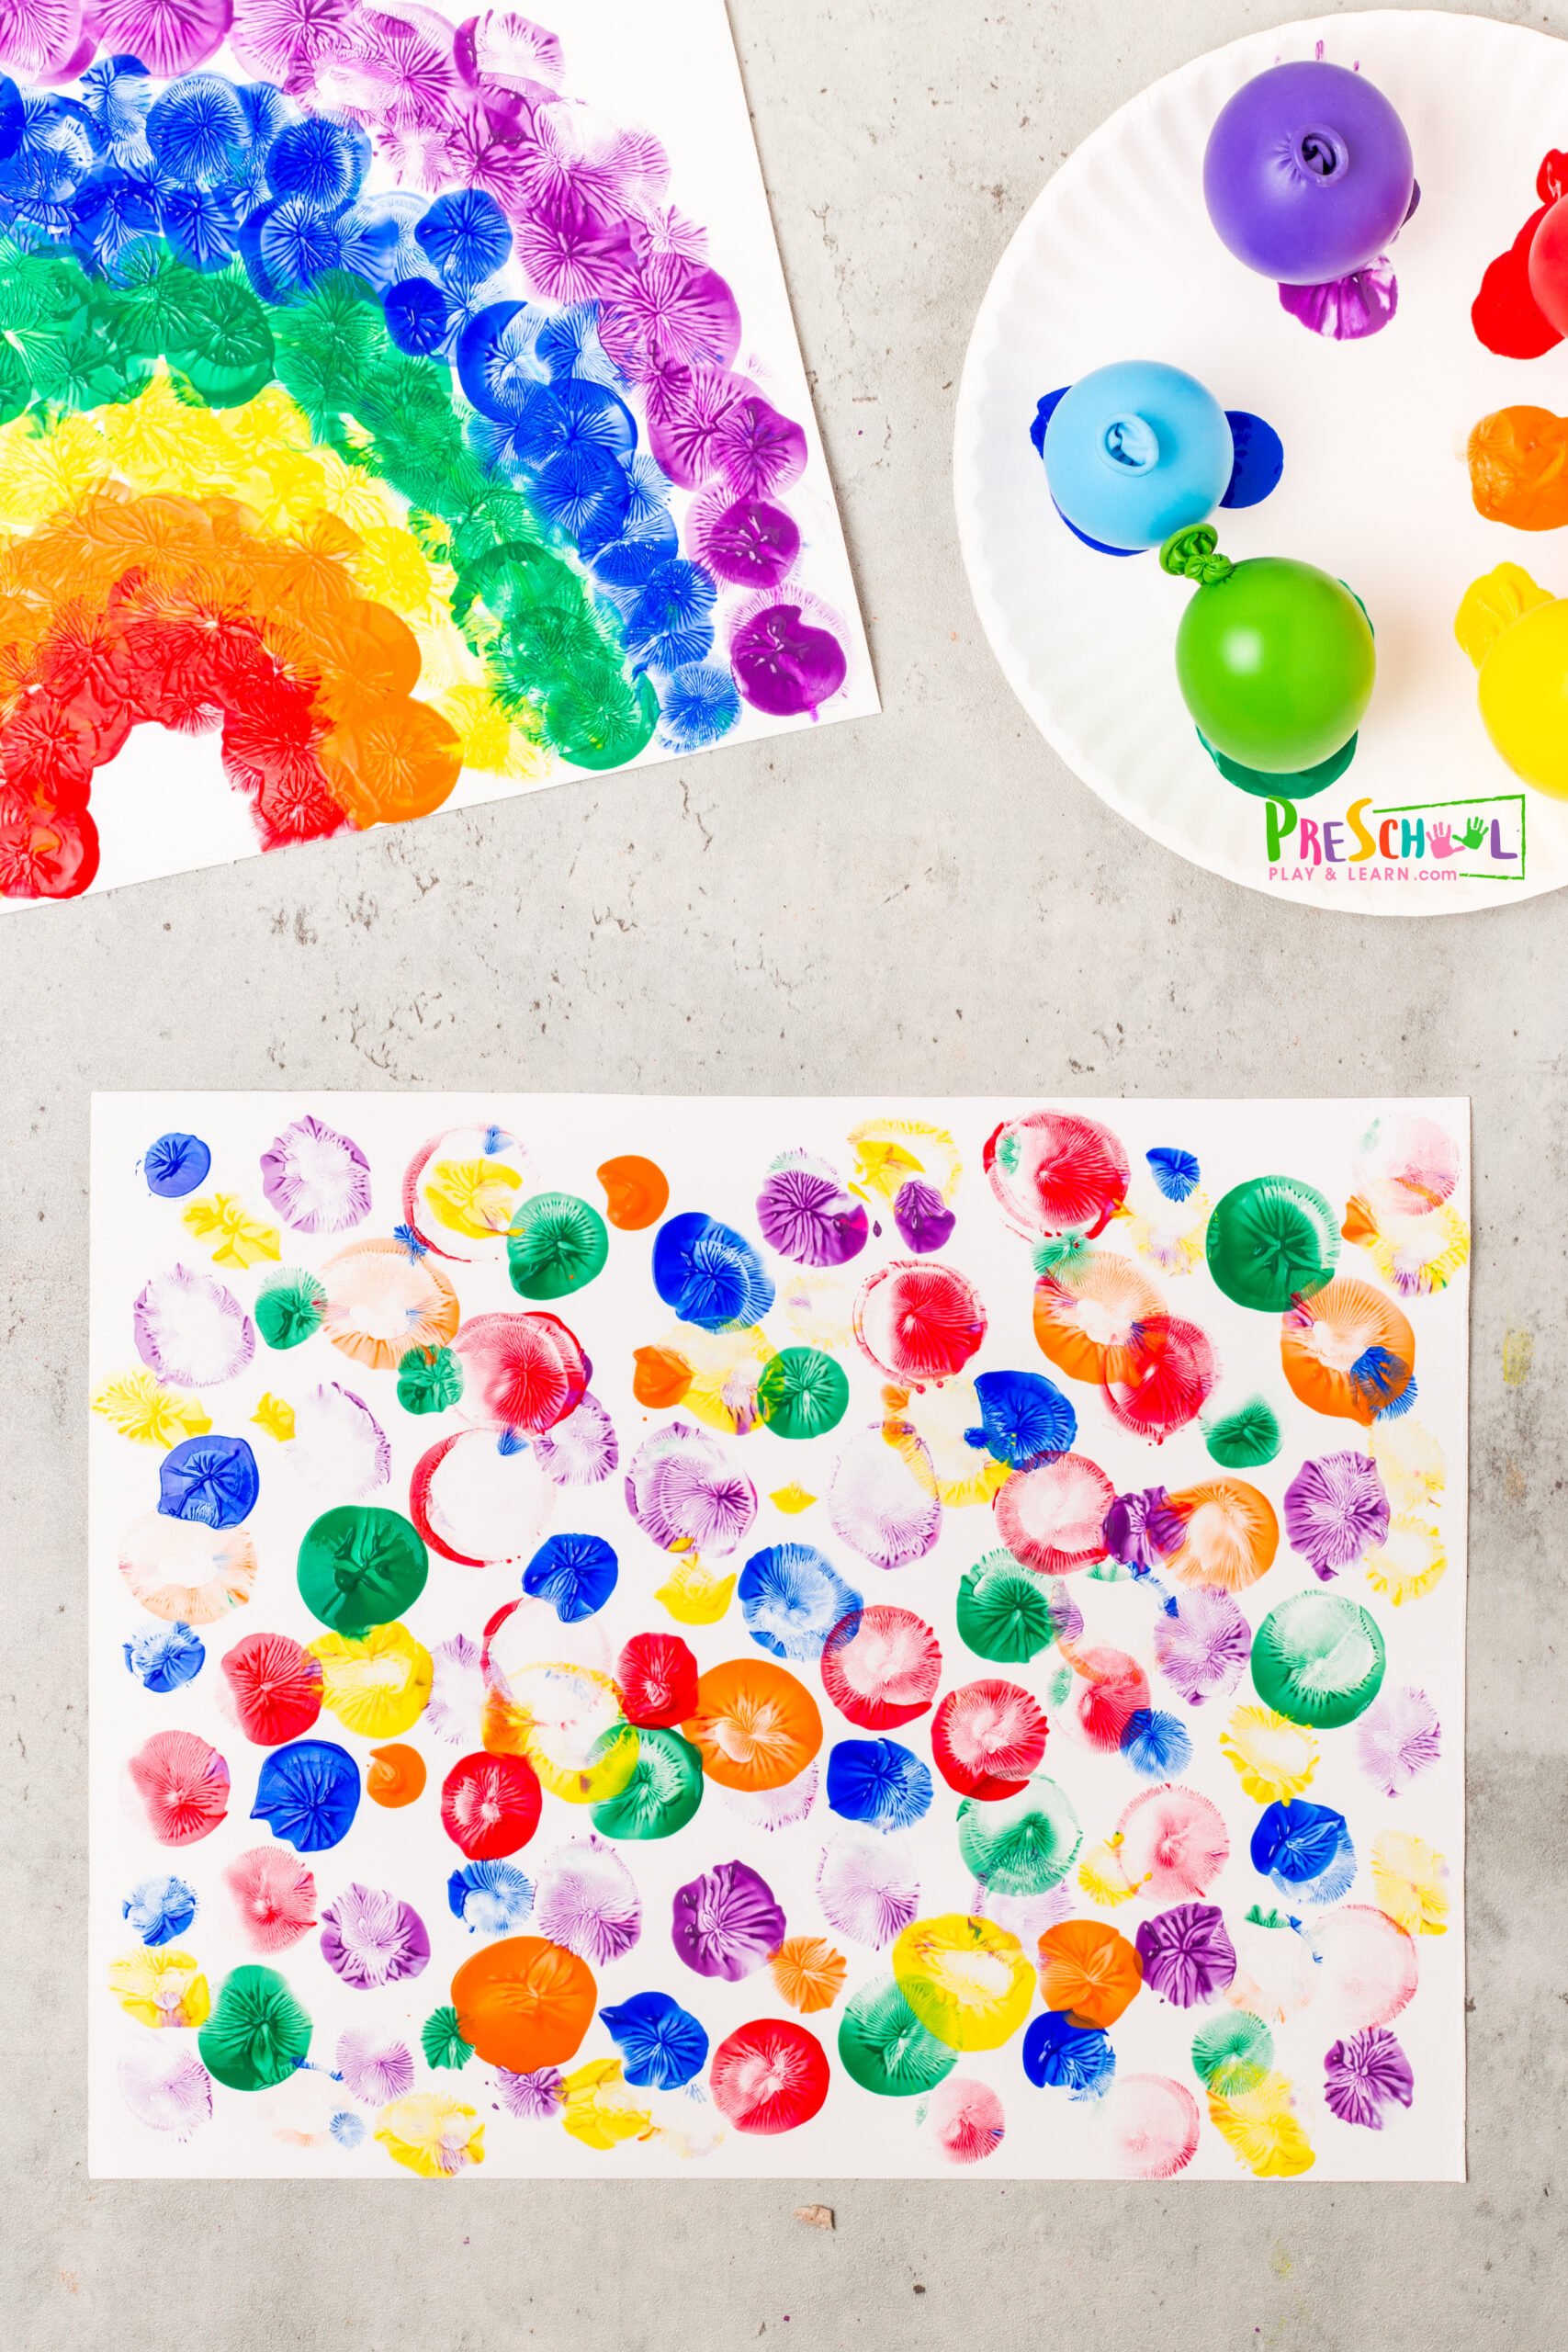 🎈 Balloon Painting Art Project for Toddlers and Preschoolers